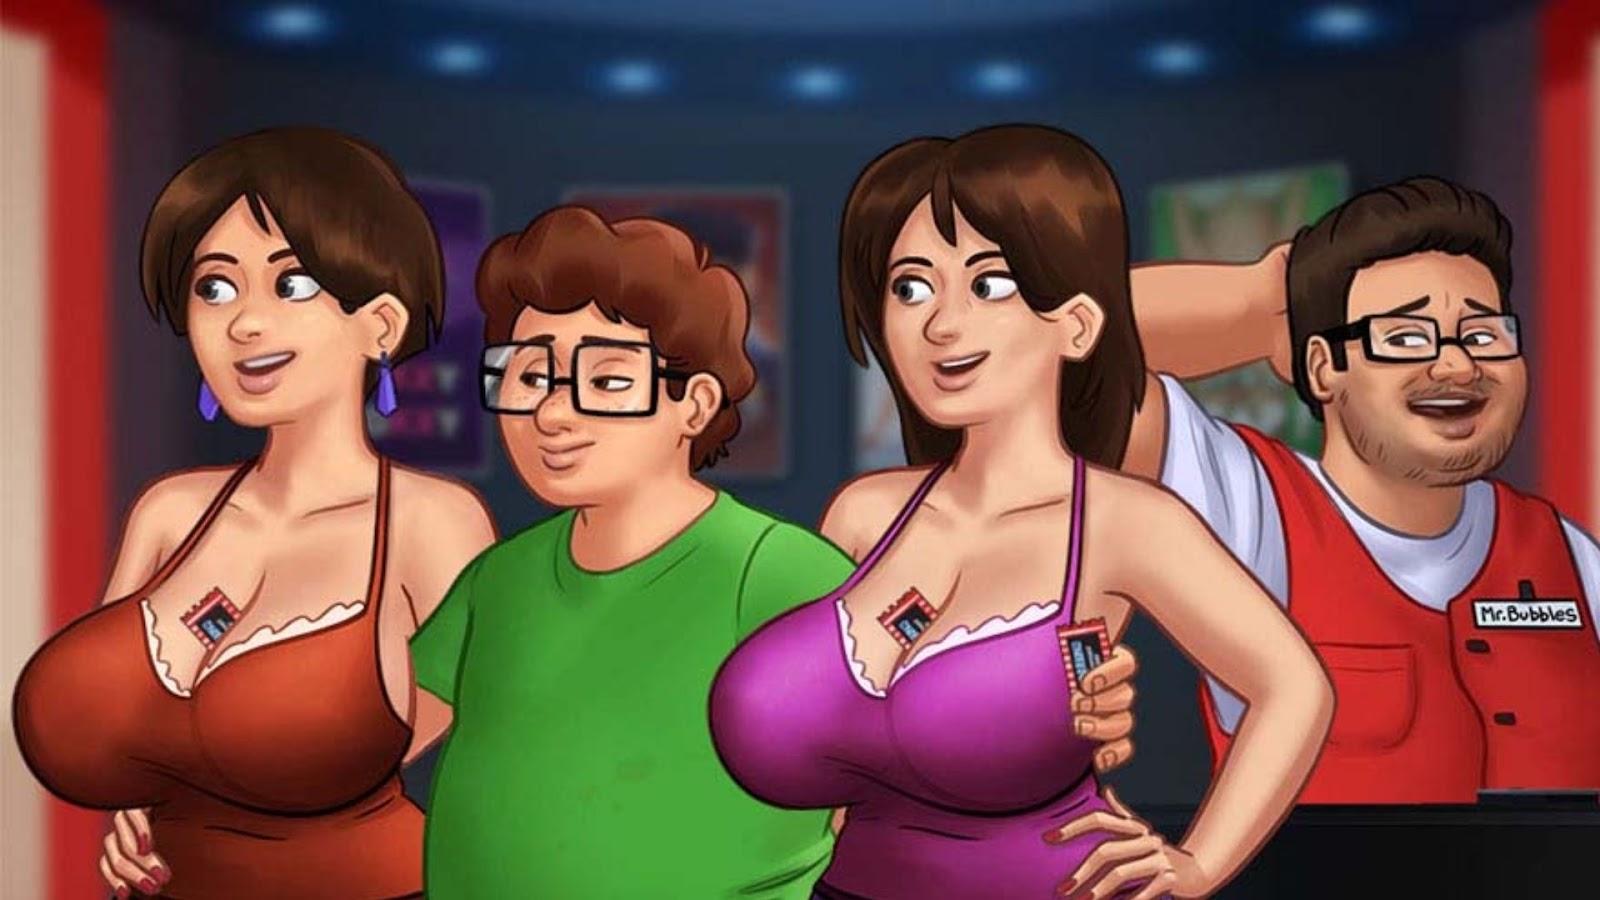 Games Porn - Top Porn Games with Best Settings for the Android Game Lovers-LDPlayer's  Choice-LDPlayer